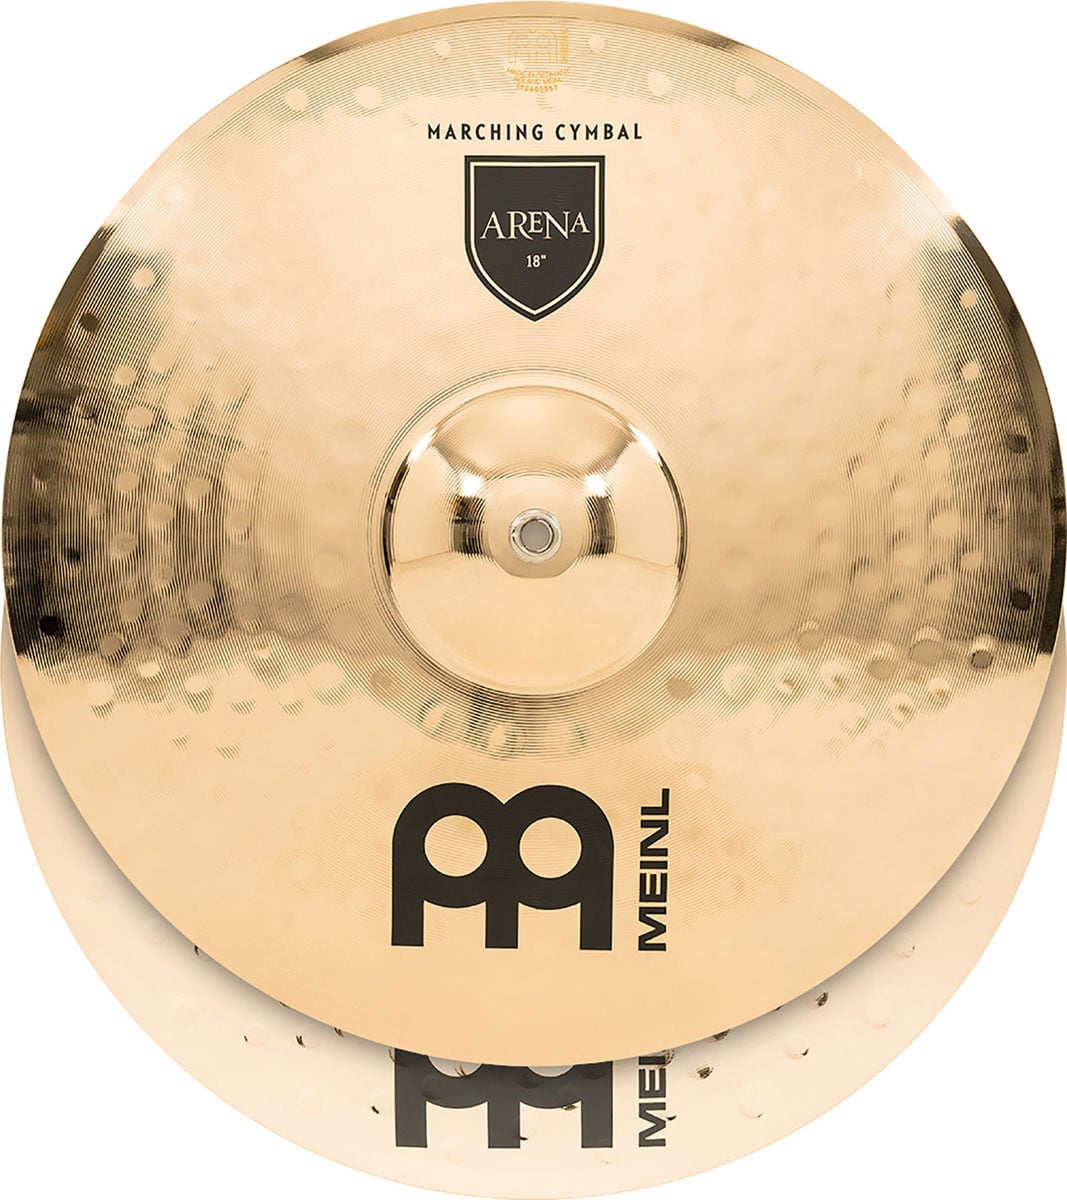 MEINL MA-AR-18 - PAIR CYMBALS MARCHING ARENA 18